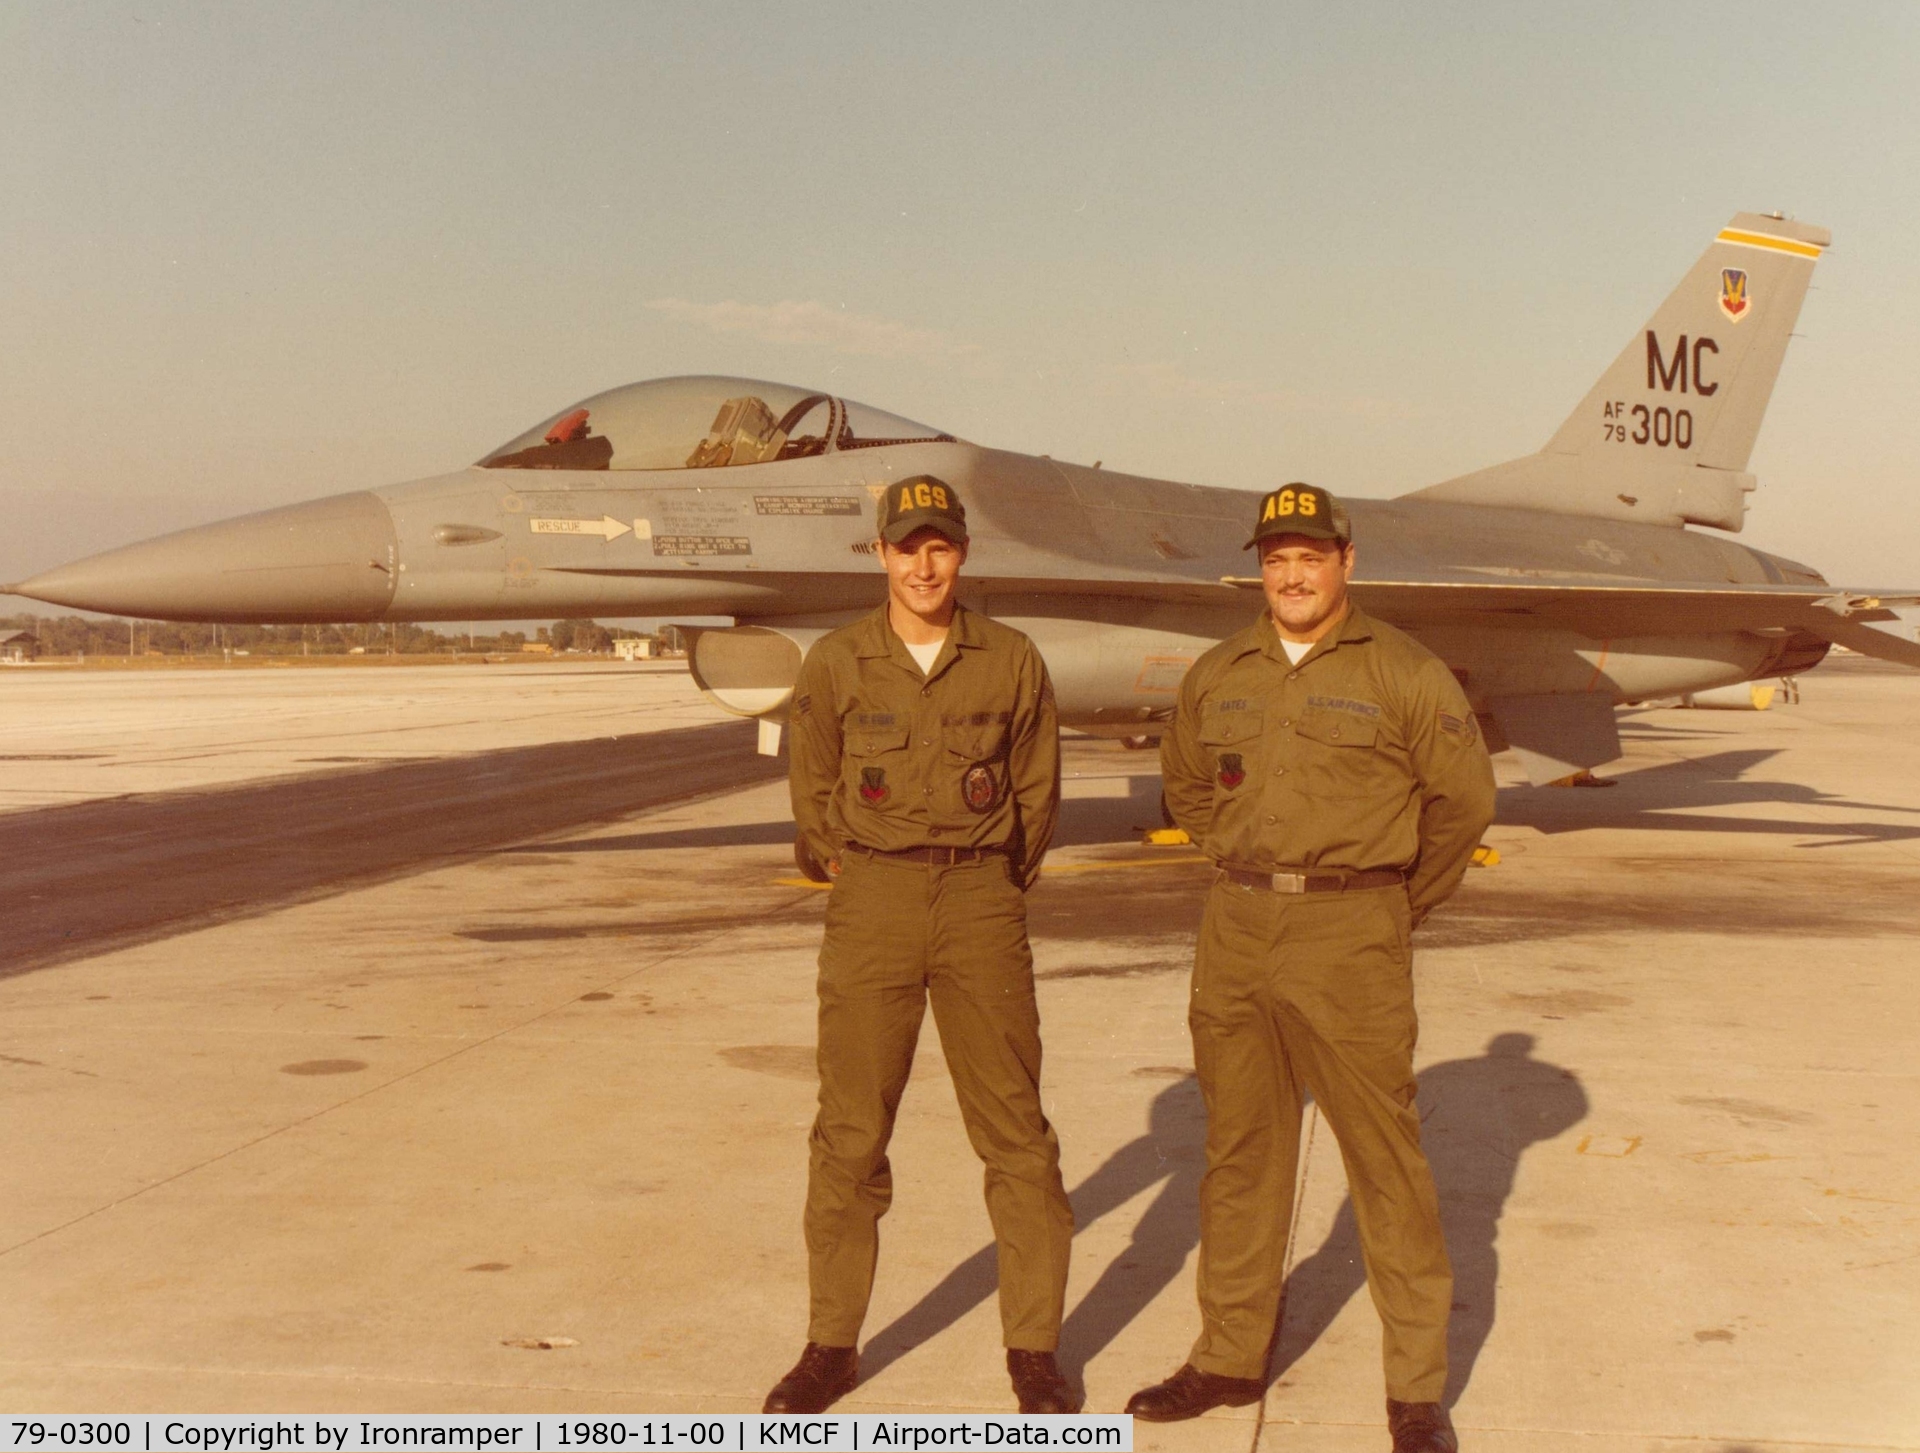 79-0300, 1980 General Dynamics F-16A Fighting Falcon C/N 61-85, My first assignment as crew chief, 79-0300. Myself, SrA Martin McGuire (left) and my assistant crew chief SrA Joe Gates (right).  This photo was taken in November/December 1980 in honor of being awarded the 56th Tac Trng Wing 5 Star Award for Exceptional 